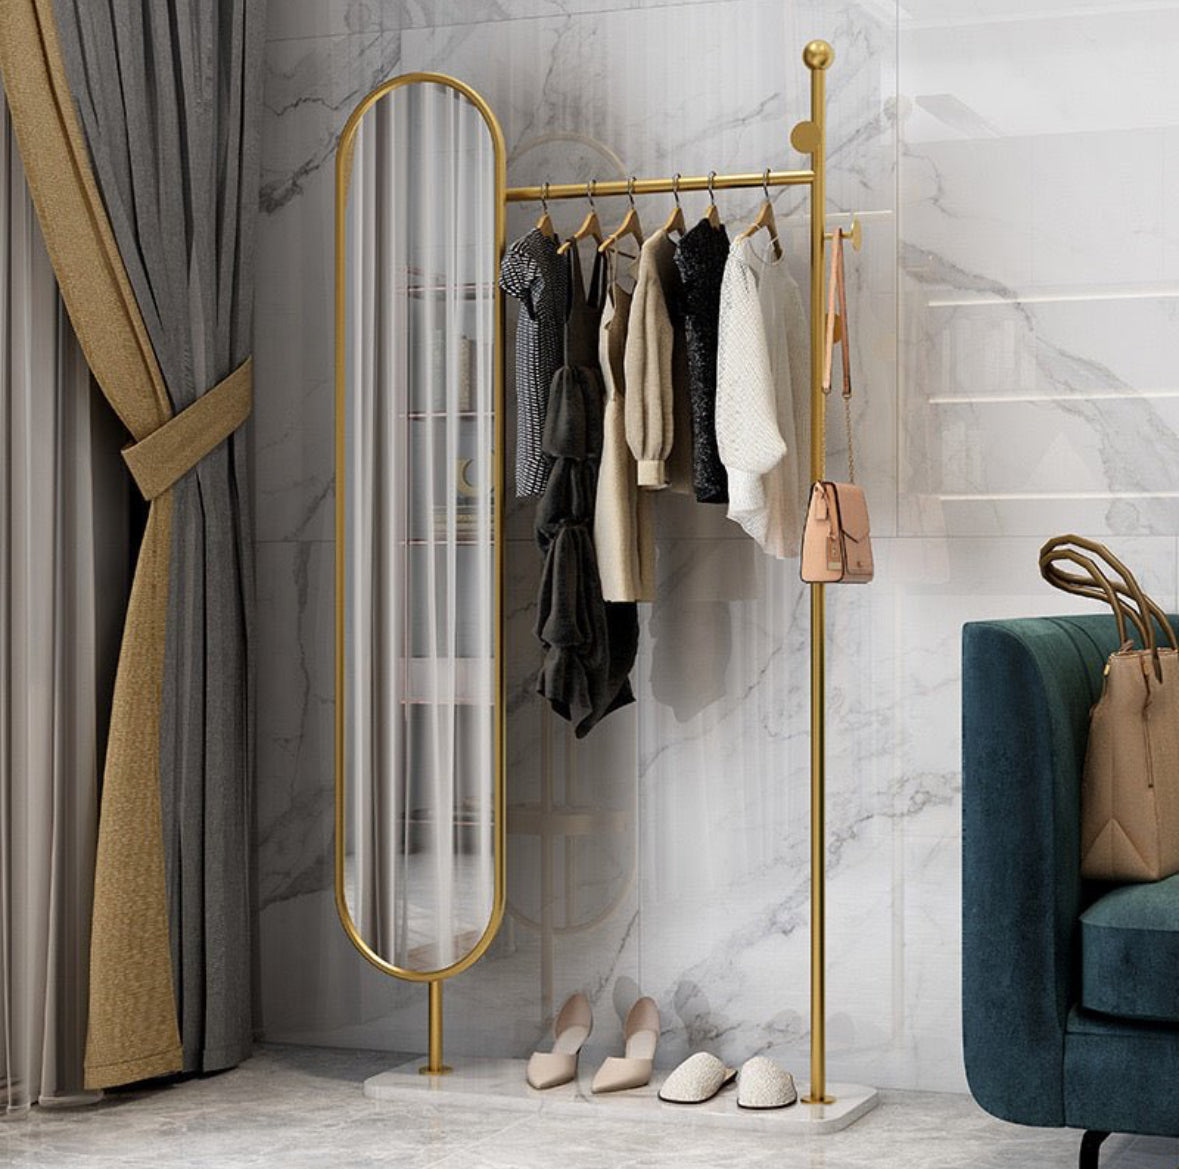 Clothes rack with oval mirror